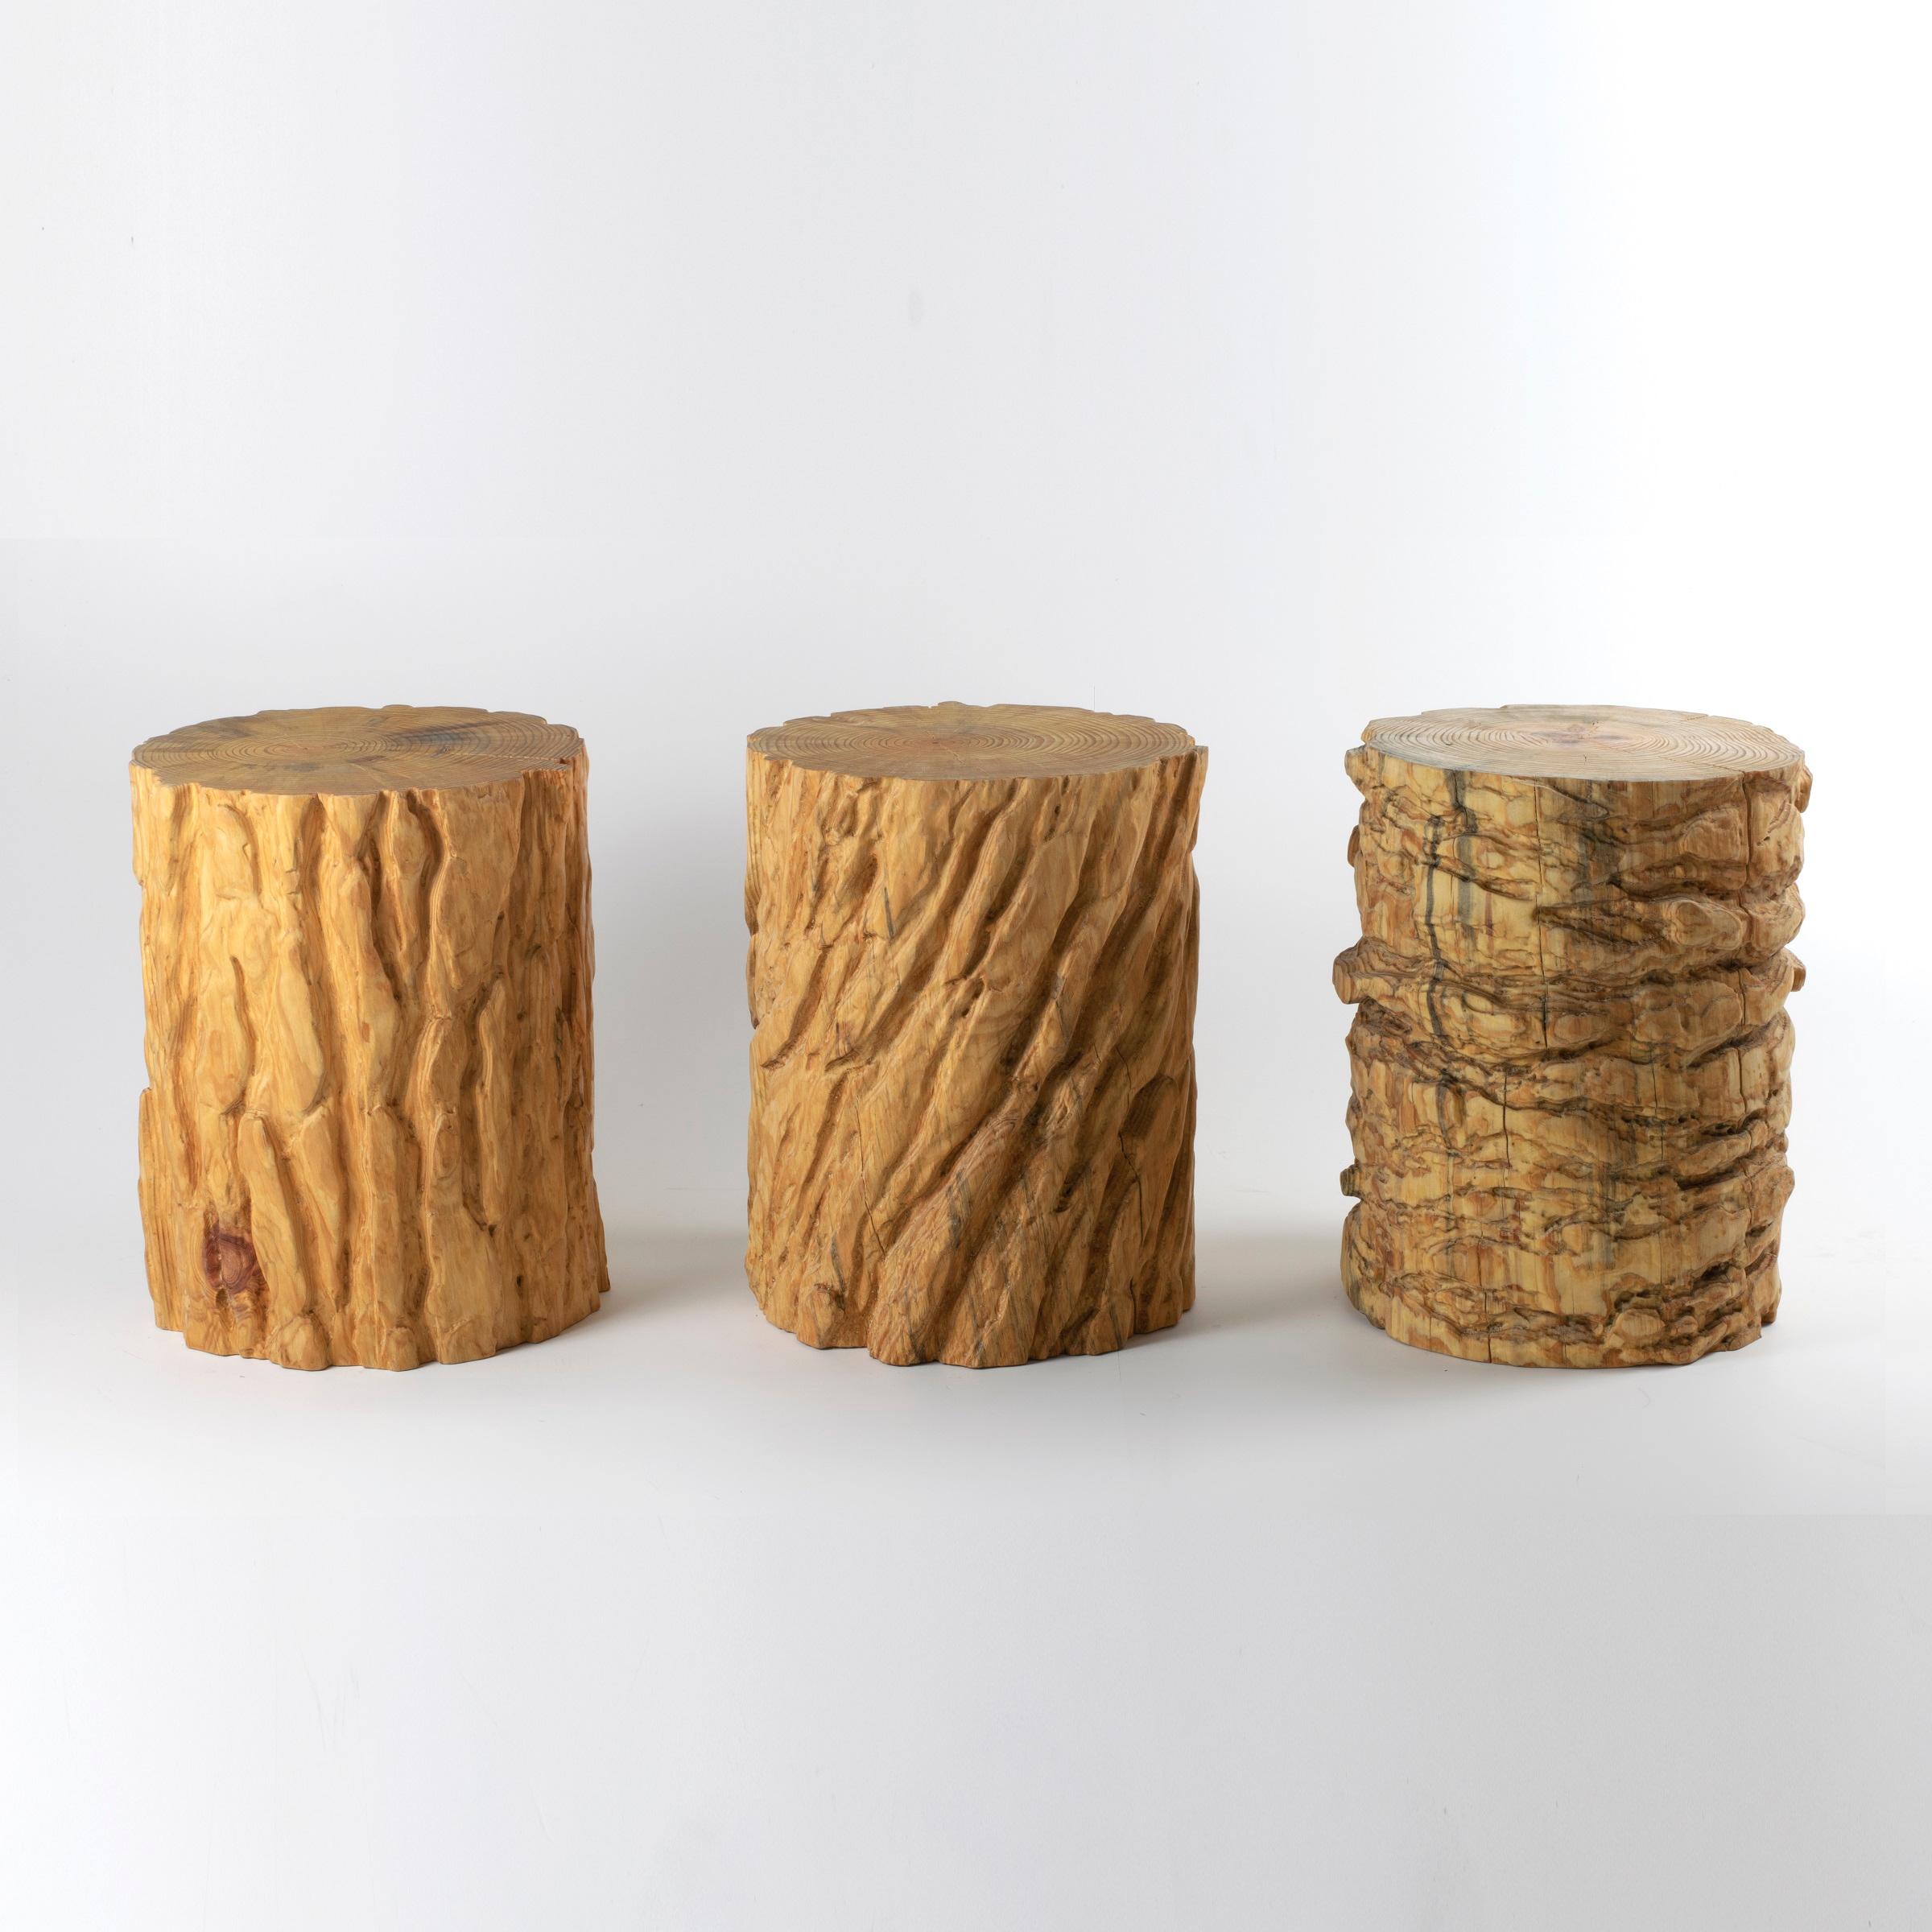 Machine-Made Bark Map Stool, Forty-five by Timbur, Represented by Tuleste Factory For Sale